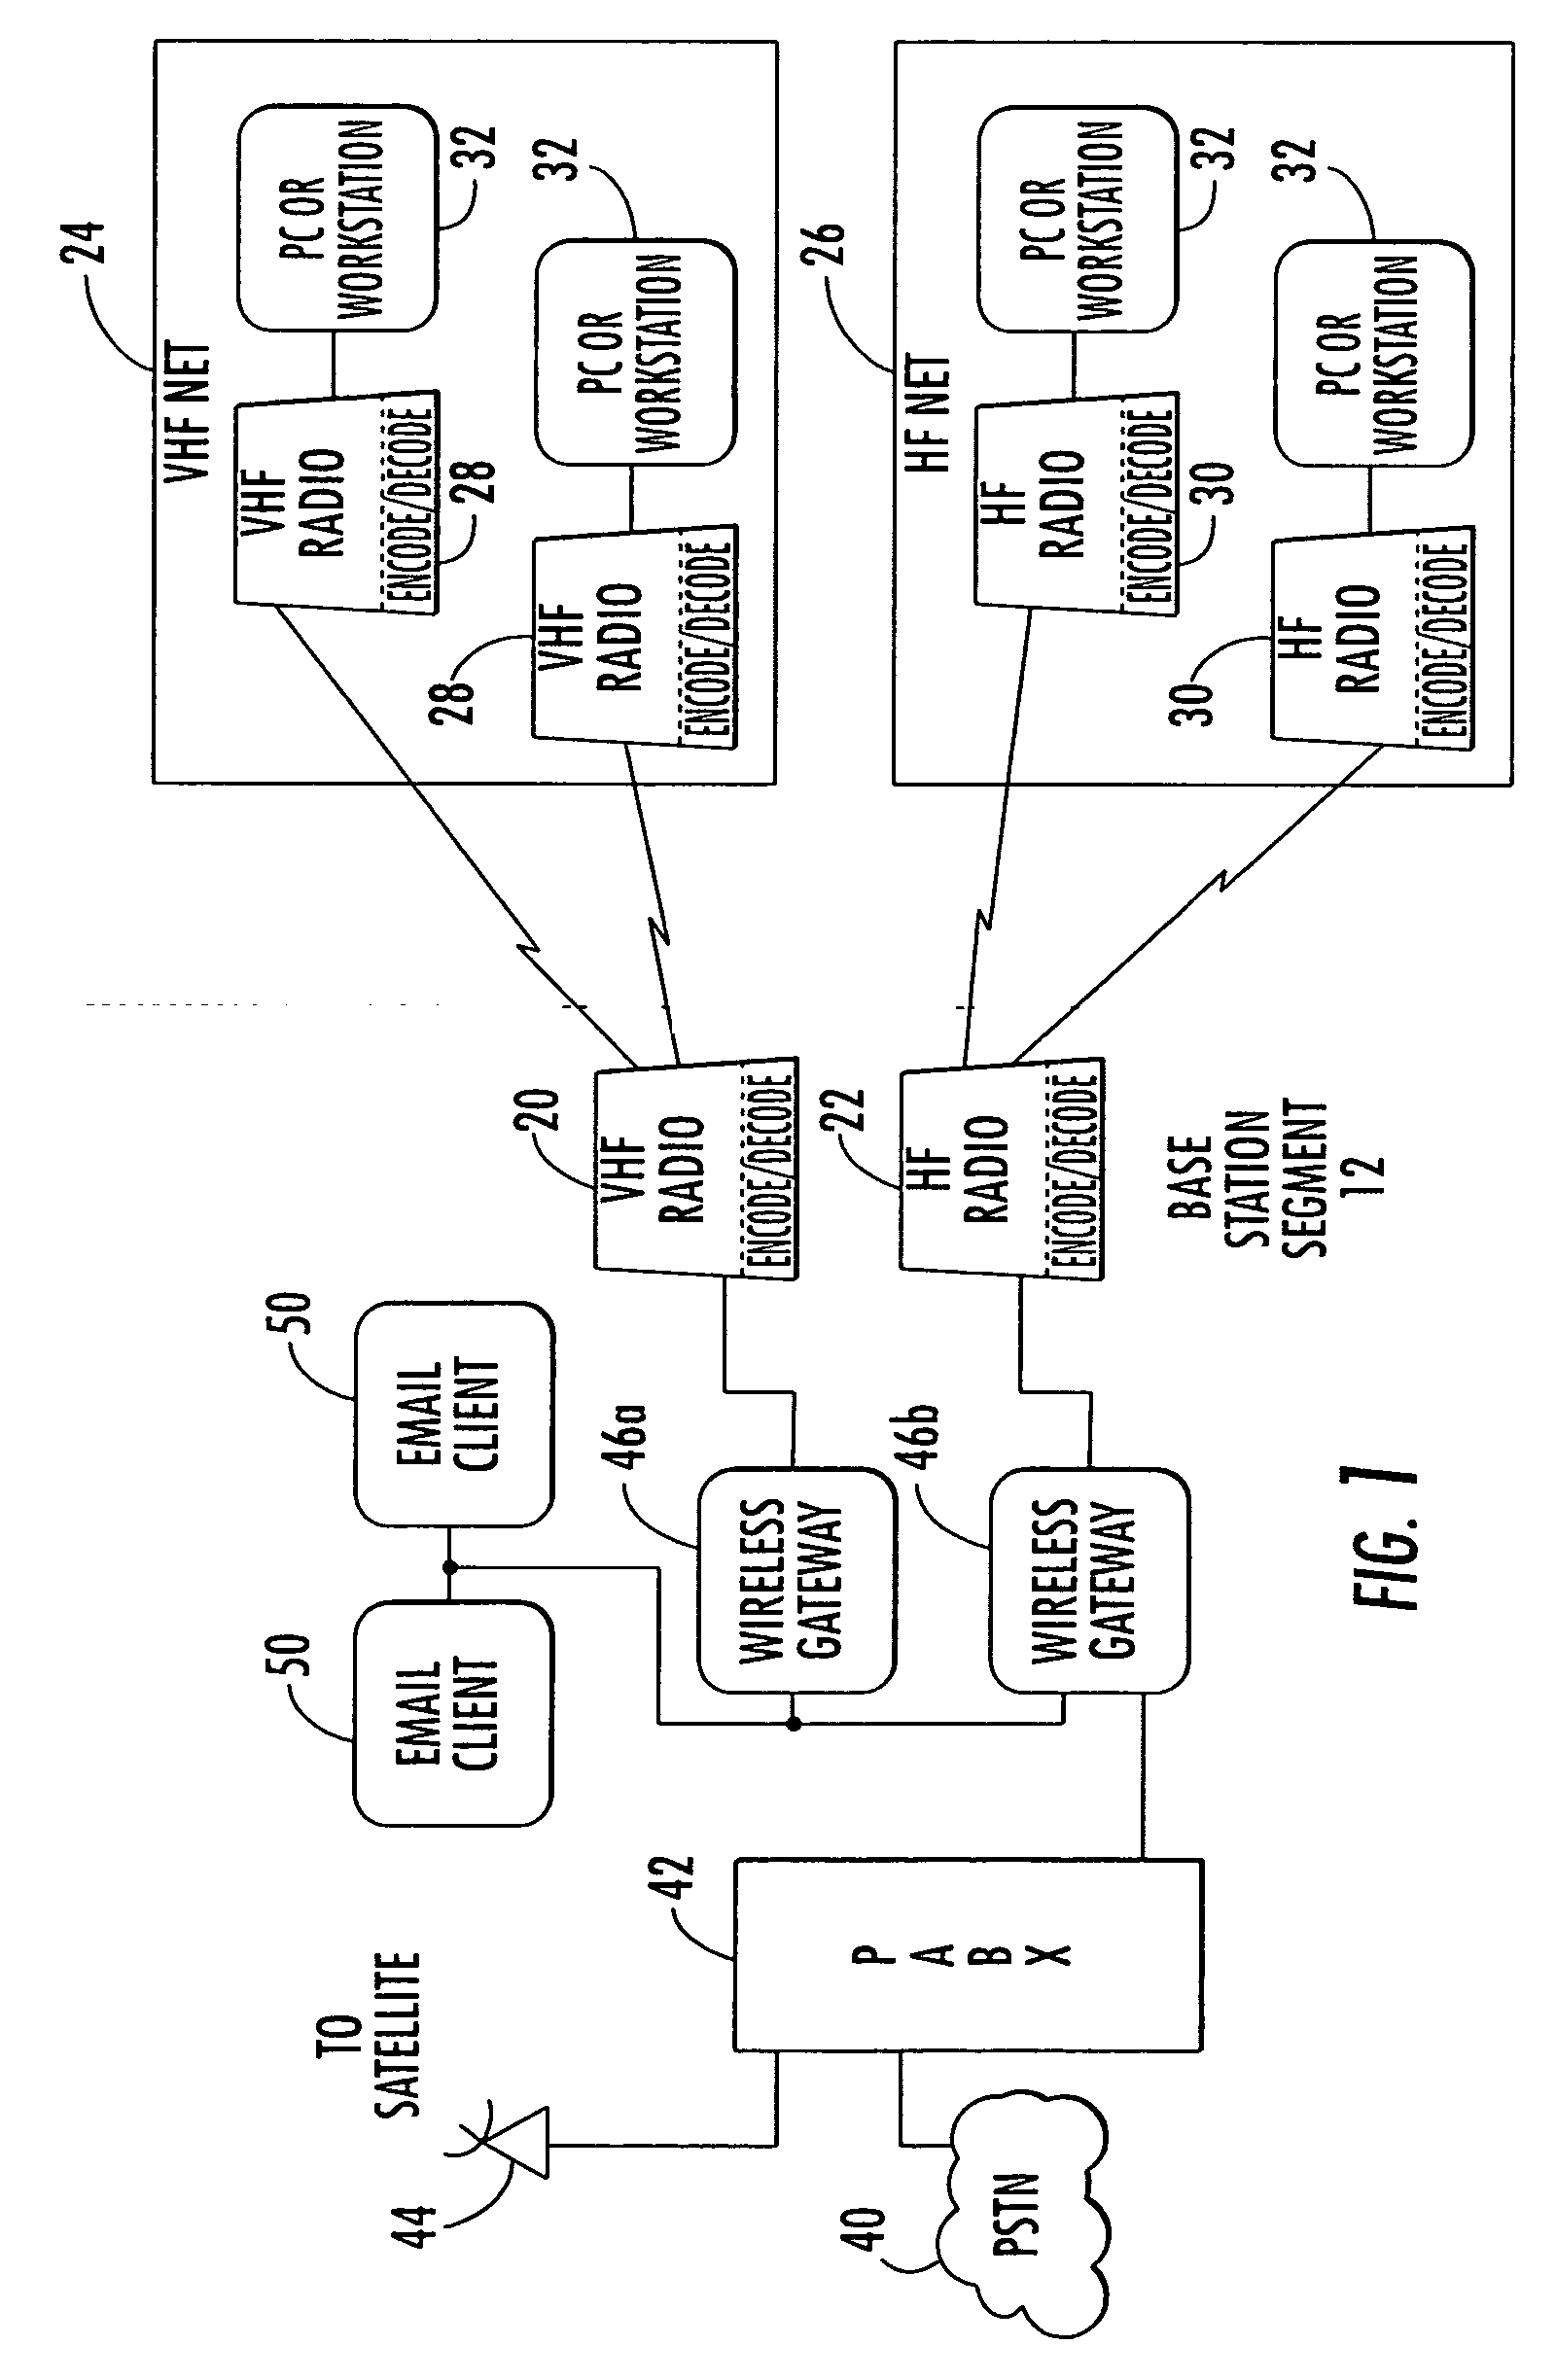 Continuous phase modulation system and method with added phase pulse